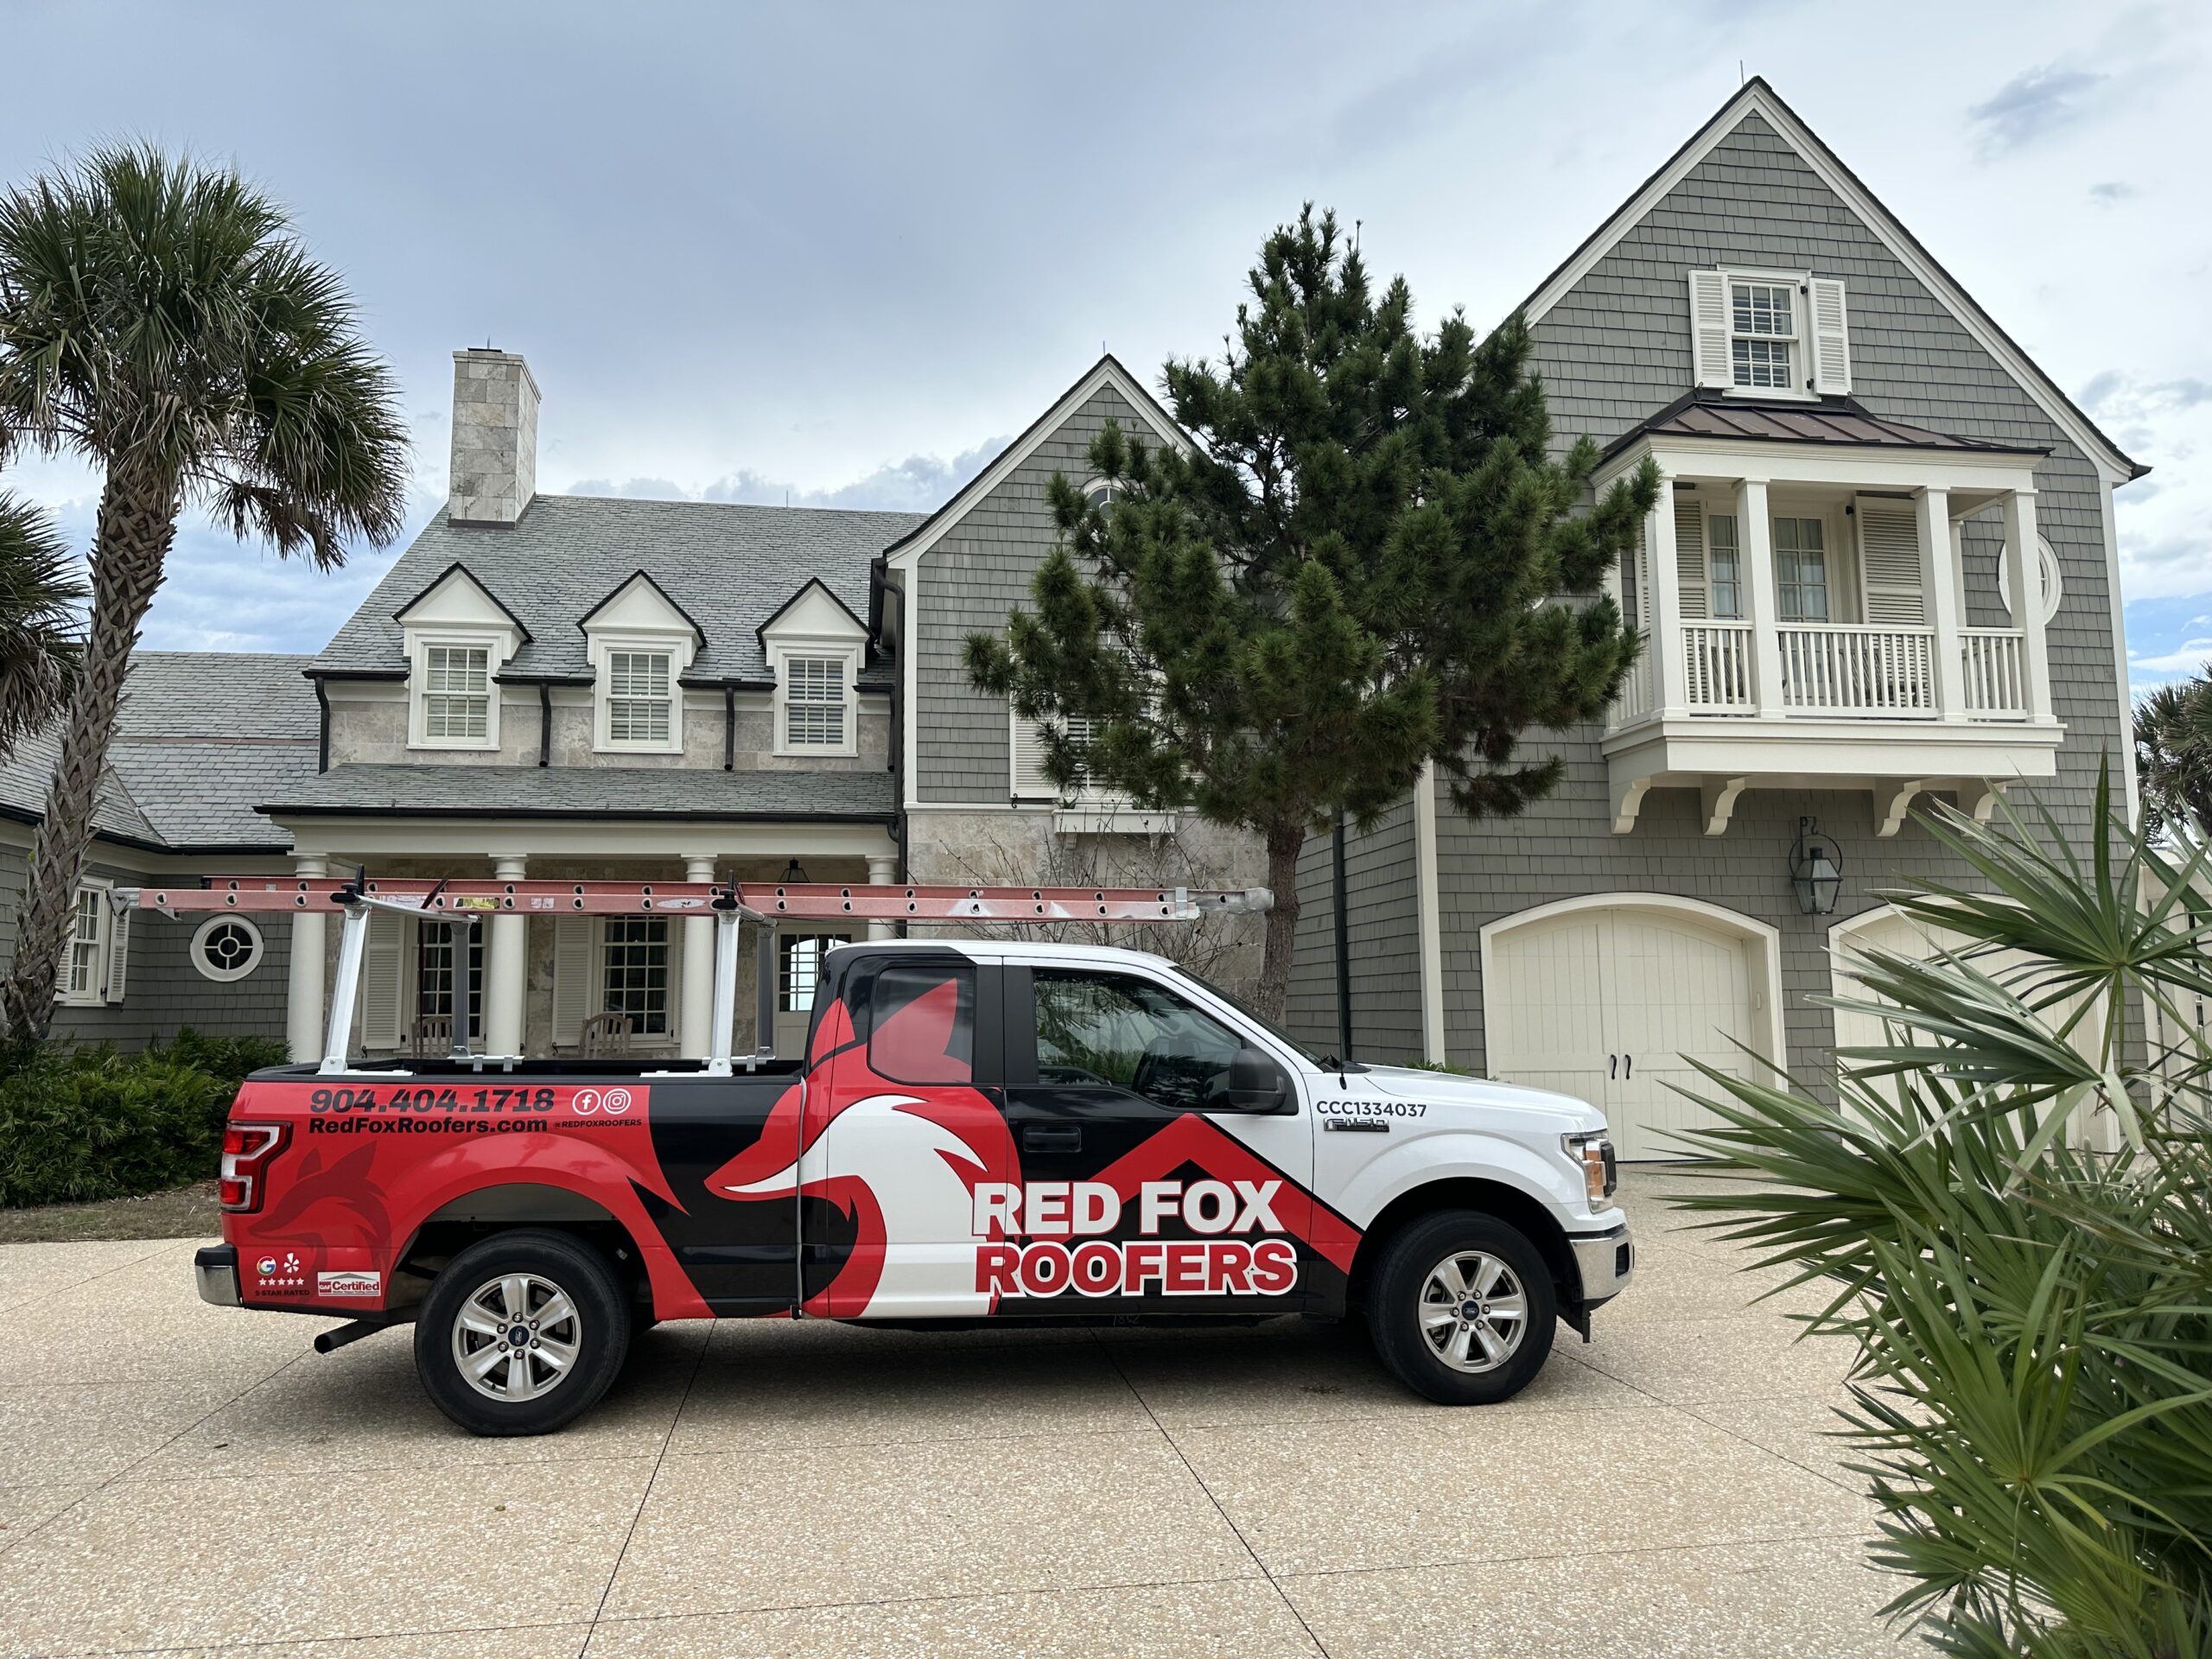 How to Find the Best Roof Repair Company in Jacksonville FL